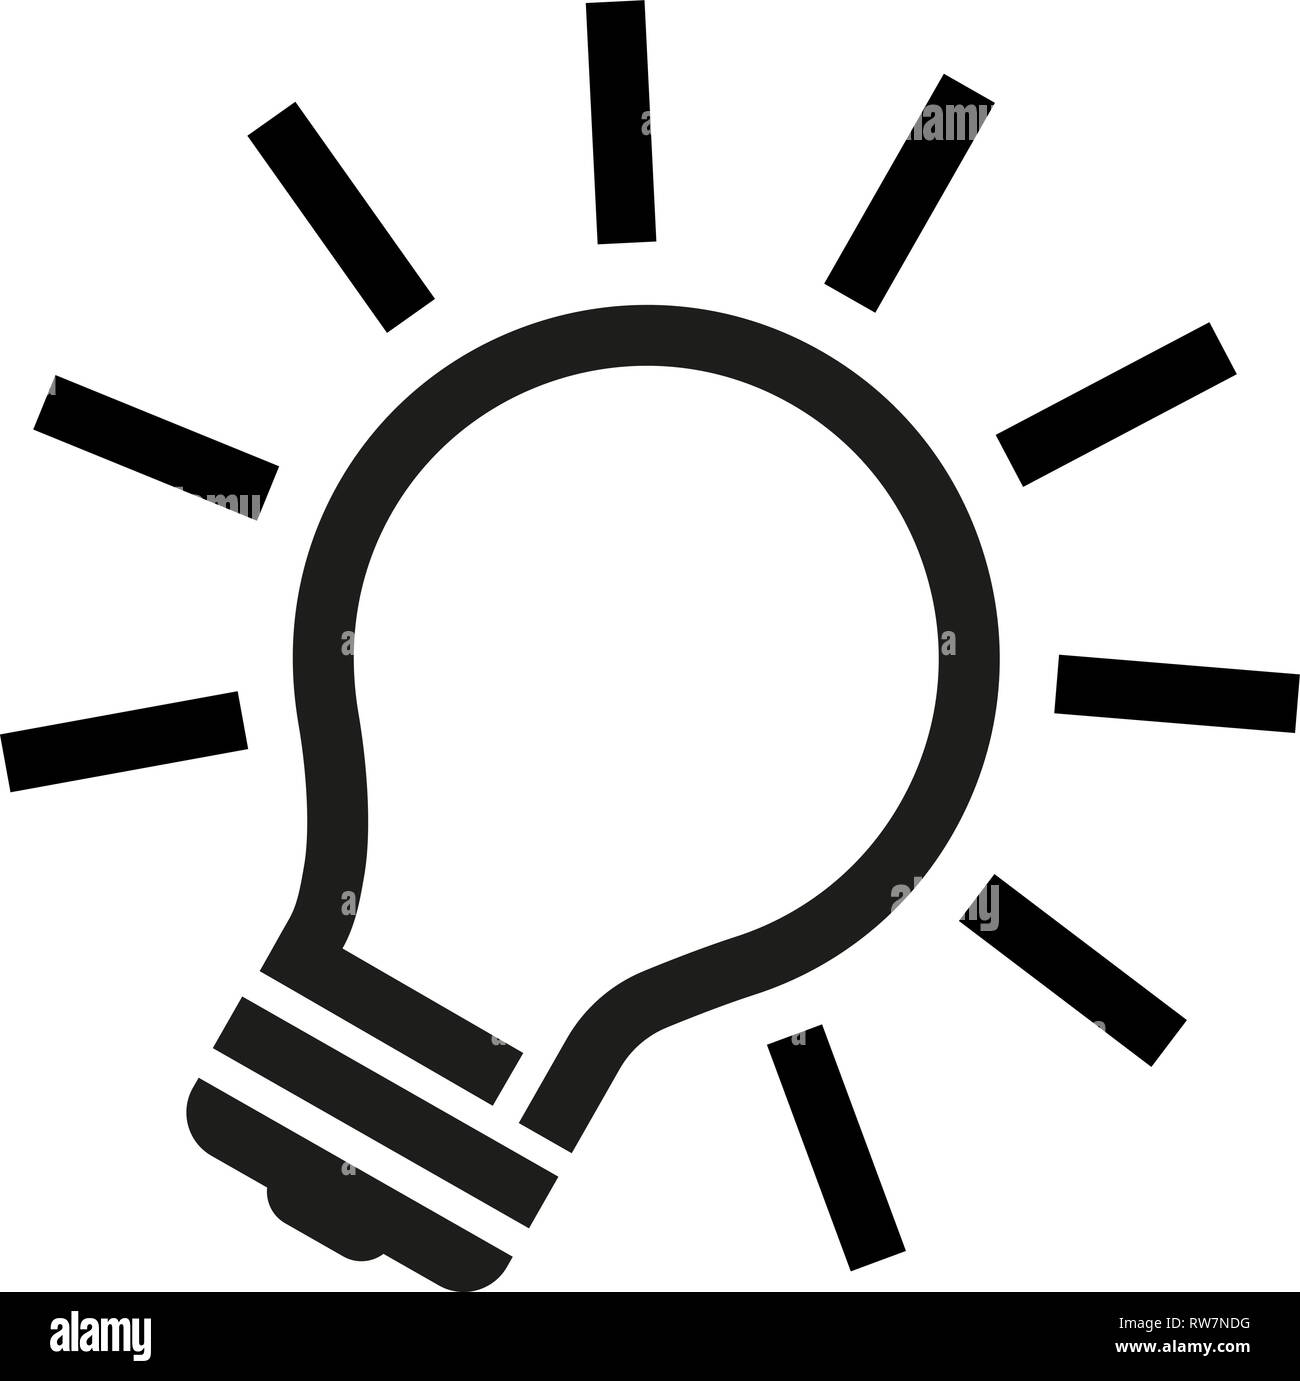 glowing light bulb black and white vector illustration Stock Vector